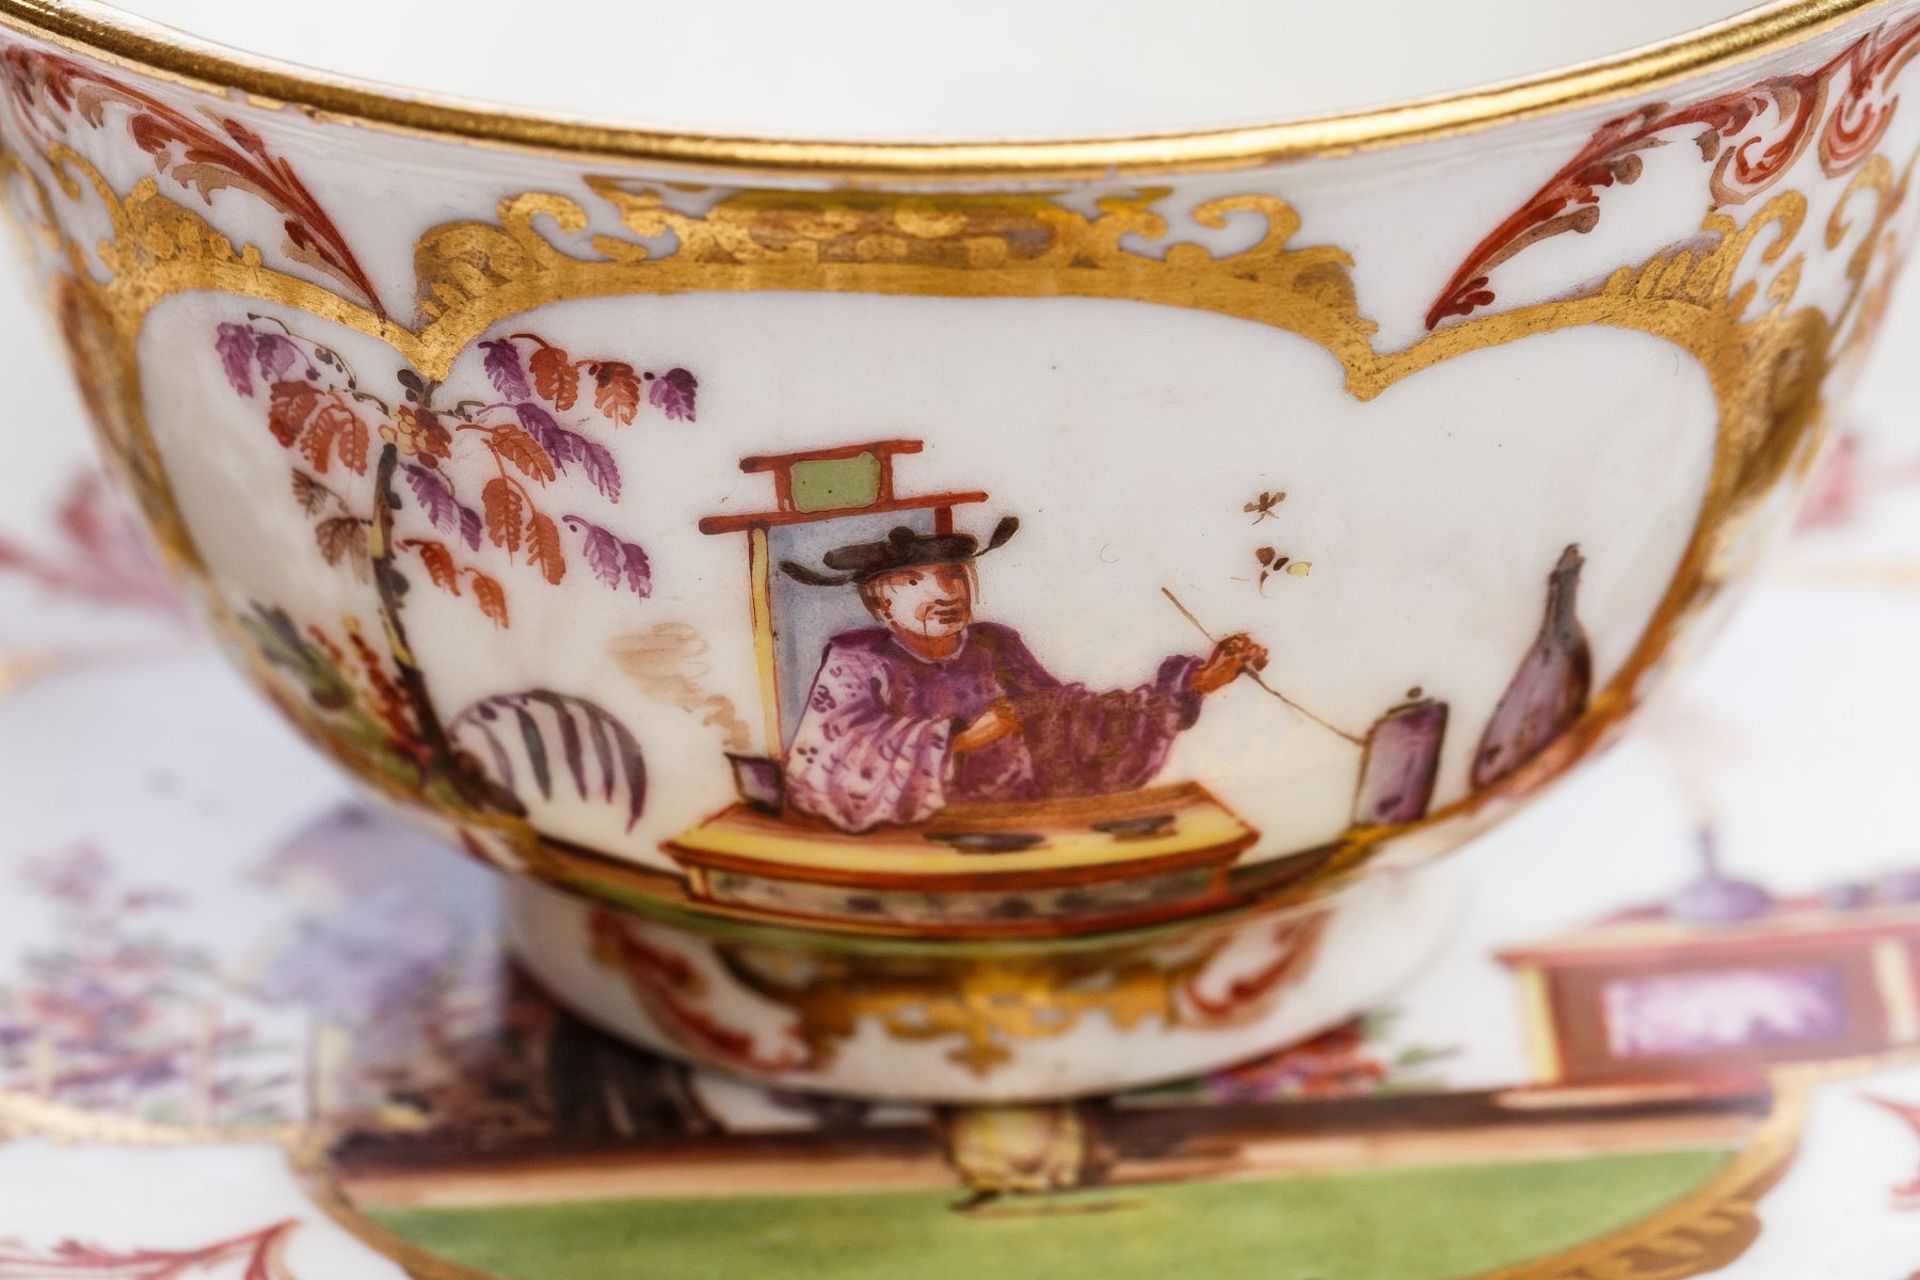 Bowl with saucer, Meissen 1723/25 - Image 4 of 5